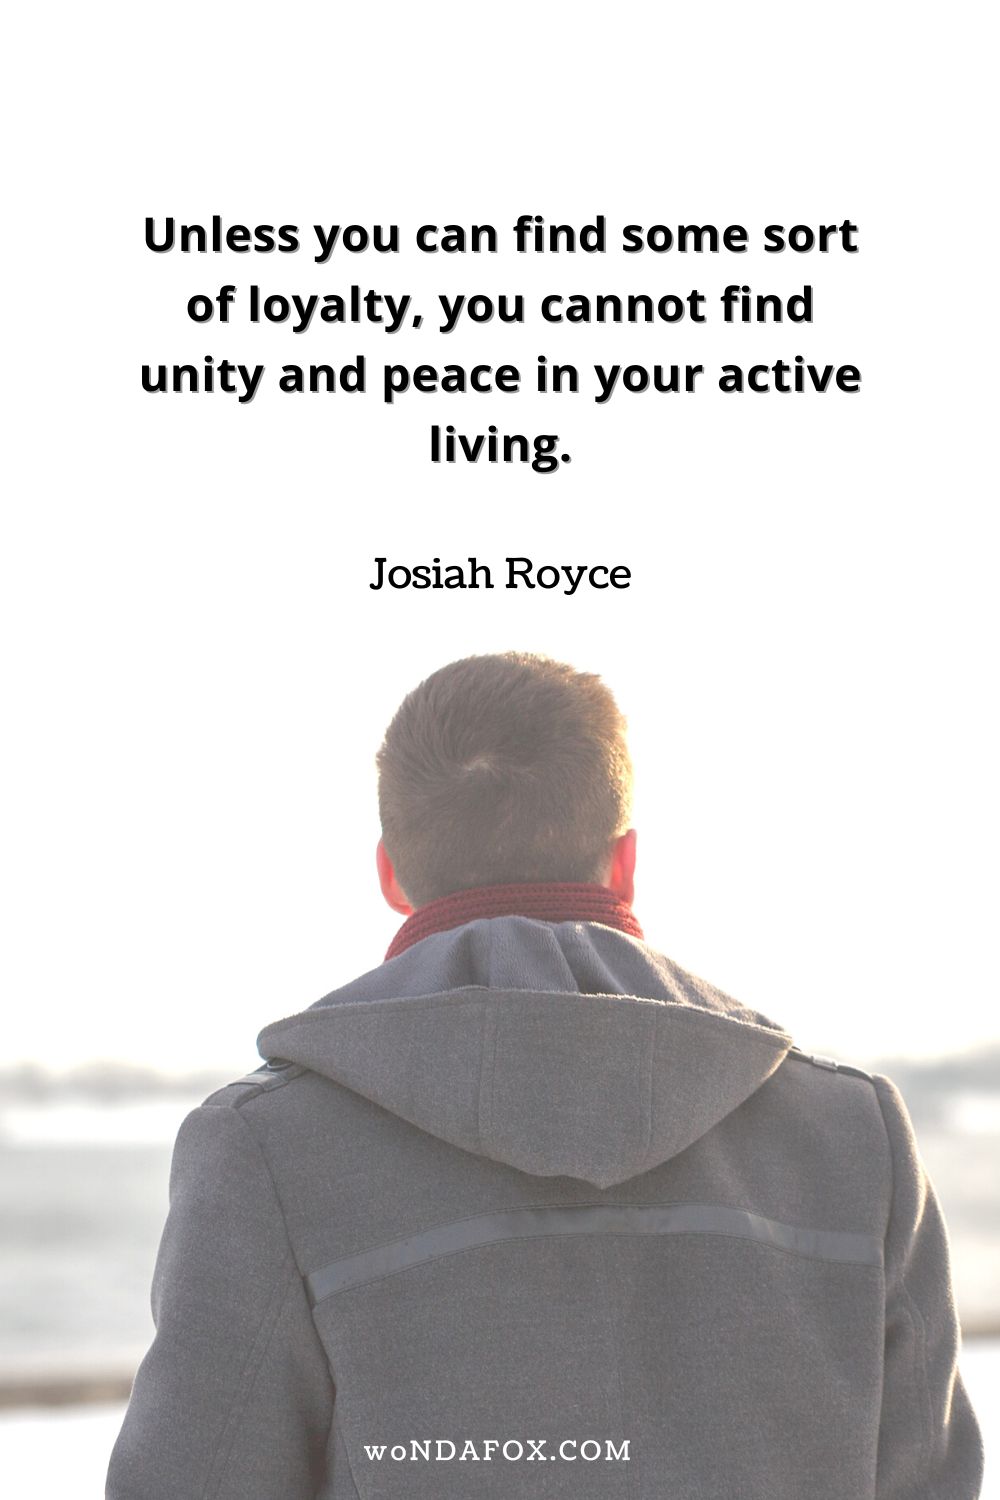 “Unless you can find some sort of loyalty, you cannot find unity and peace in your active living.” 